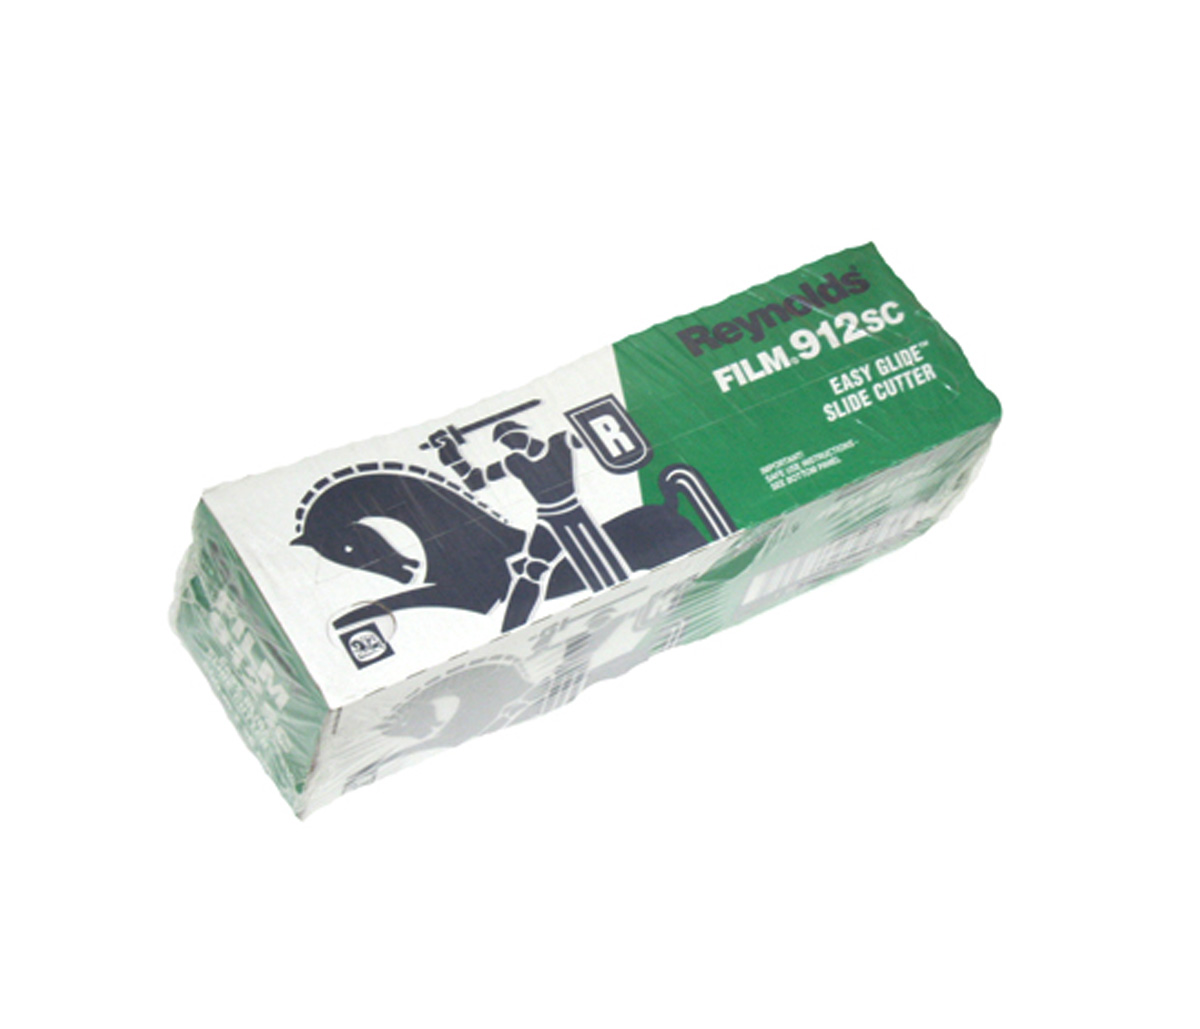 HD0202C912SC Reynolds Cling Wrap With Slide Cutter - Kwong Wah Paper  Product Co Ltd